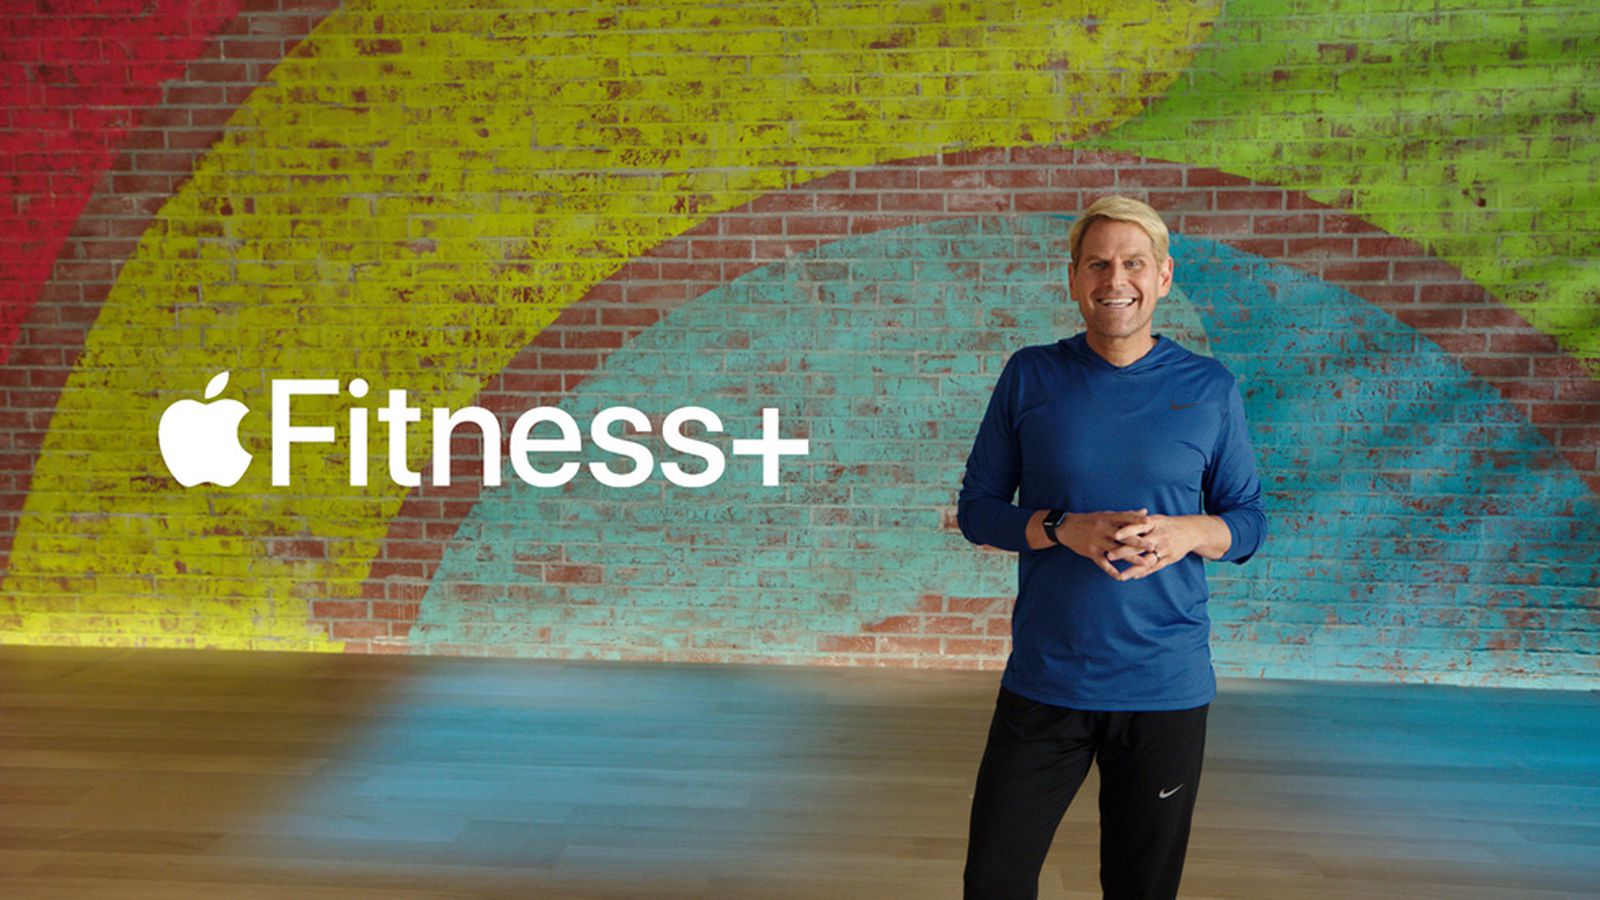 Apple Fitness+ Studio Tours Provide Behind the Scenes Look at Workout Service - macrumors.com